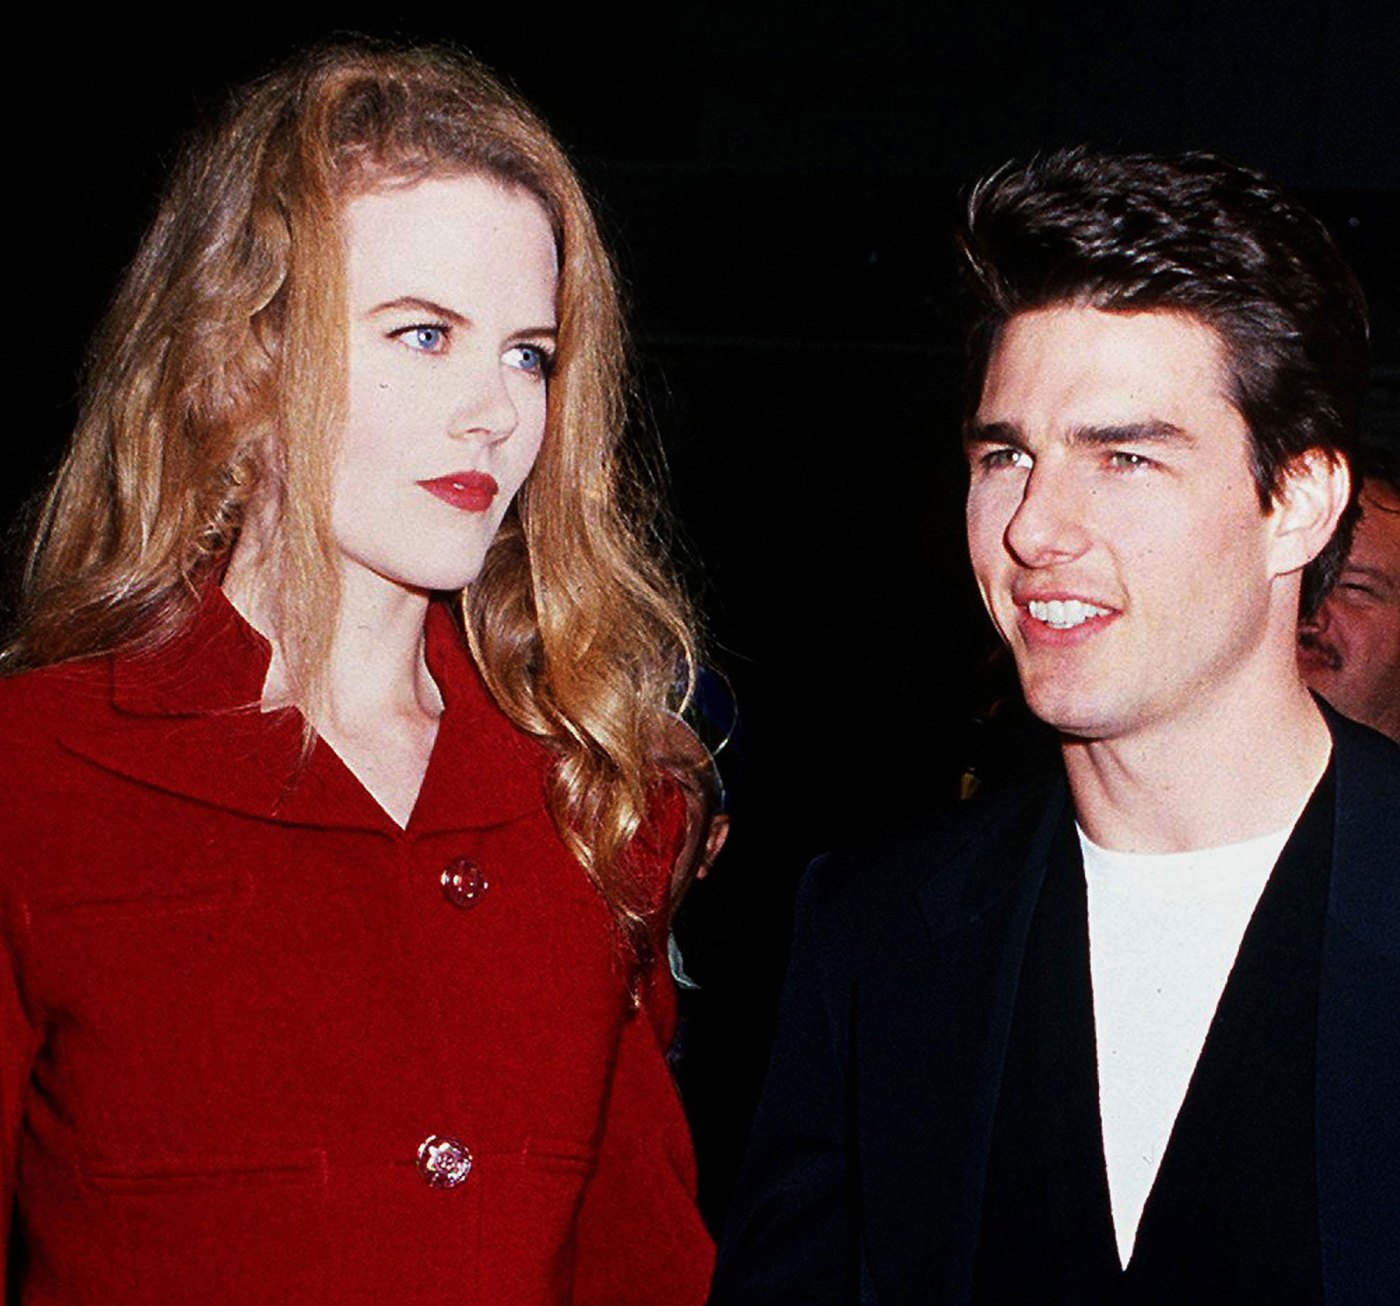 Nicole Kidman's Quotes About Tom Cruise Marriage, Divorce | Us Weekly